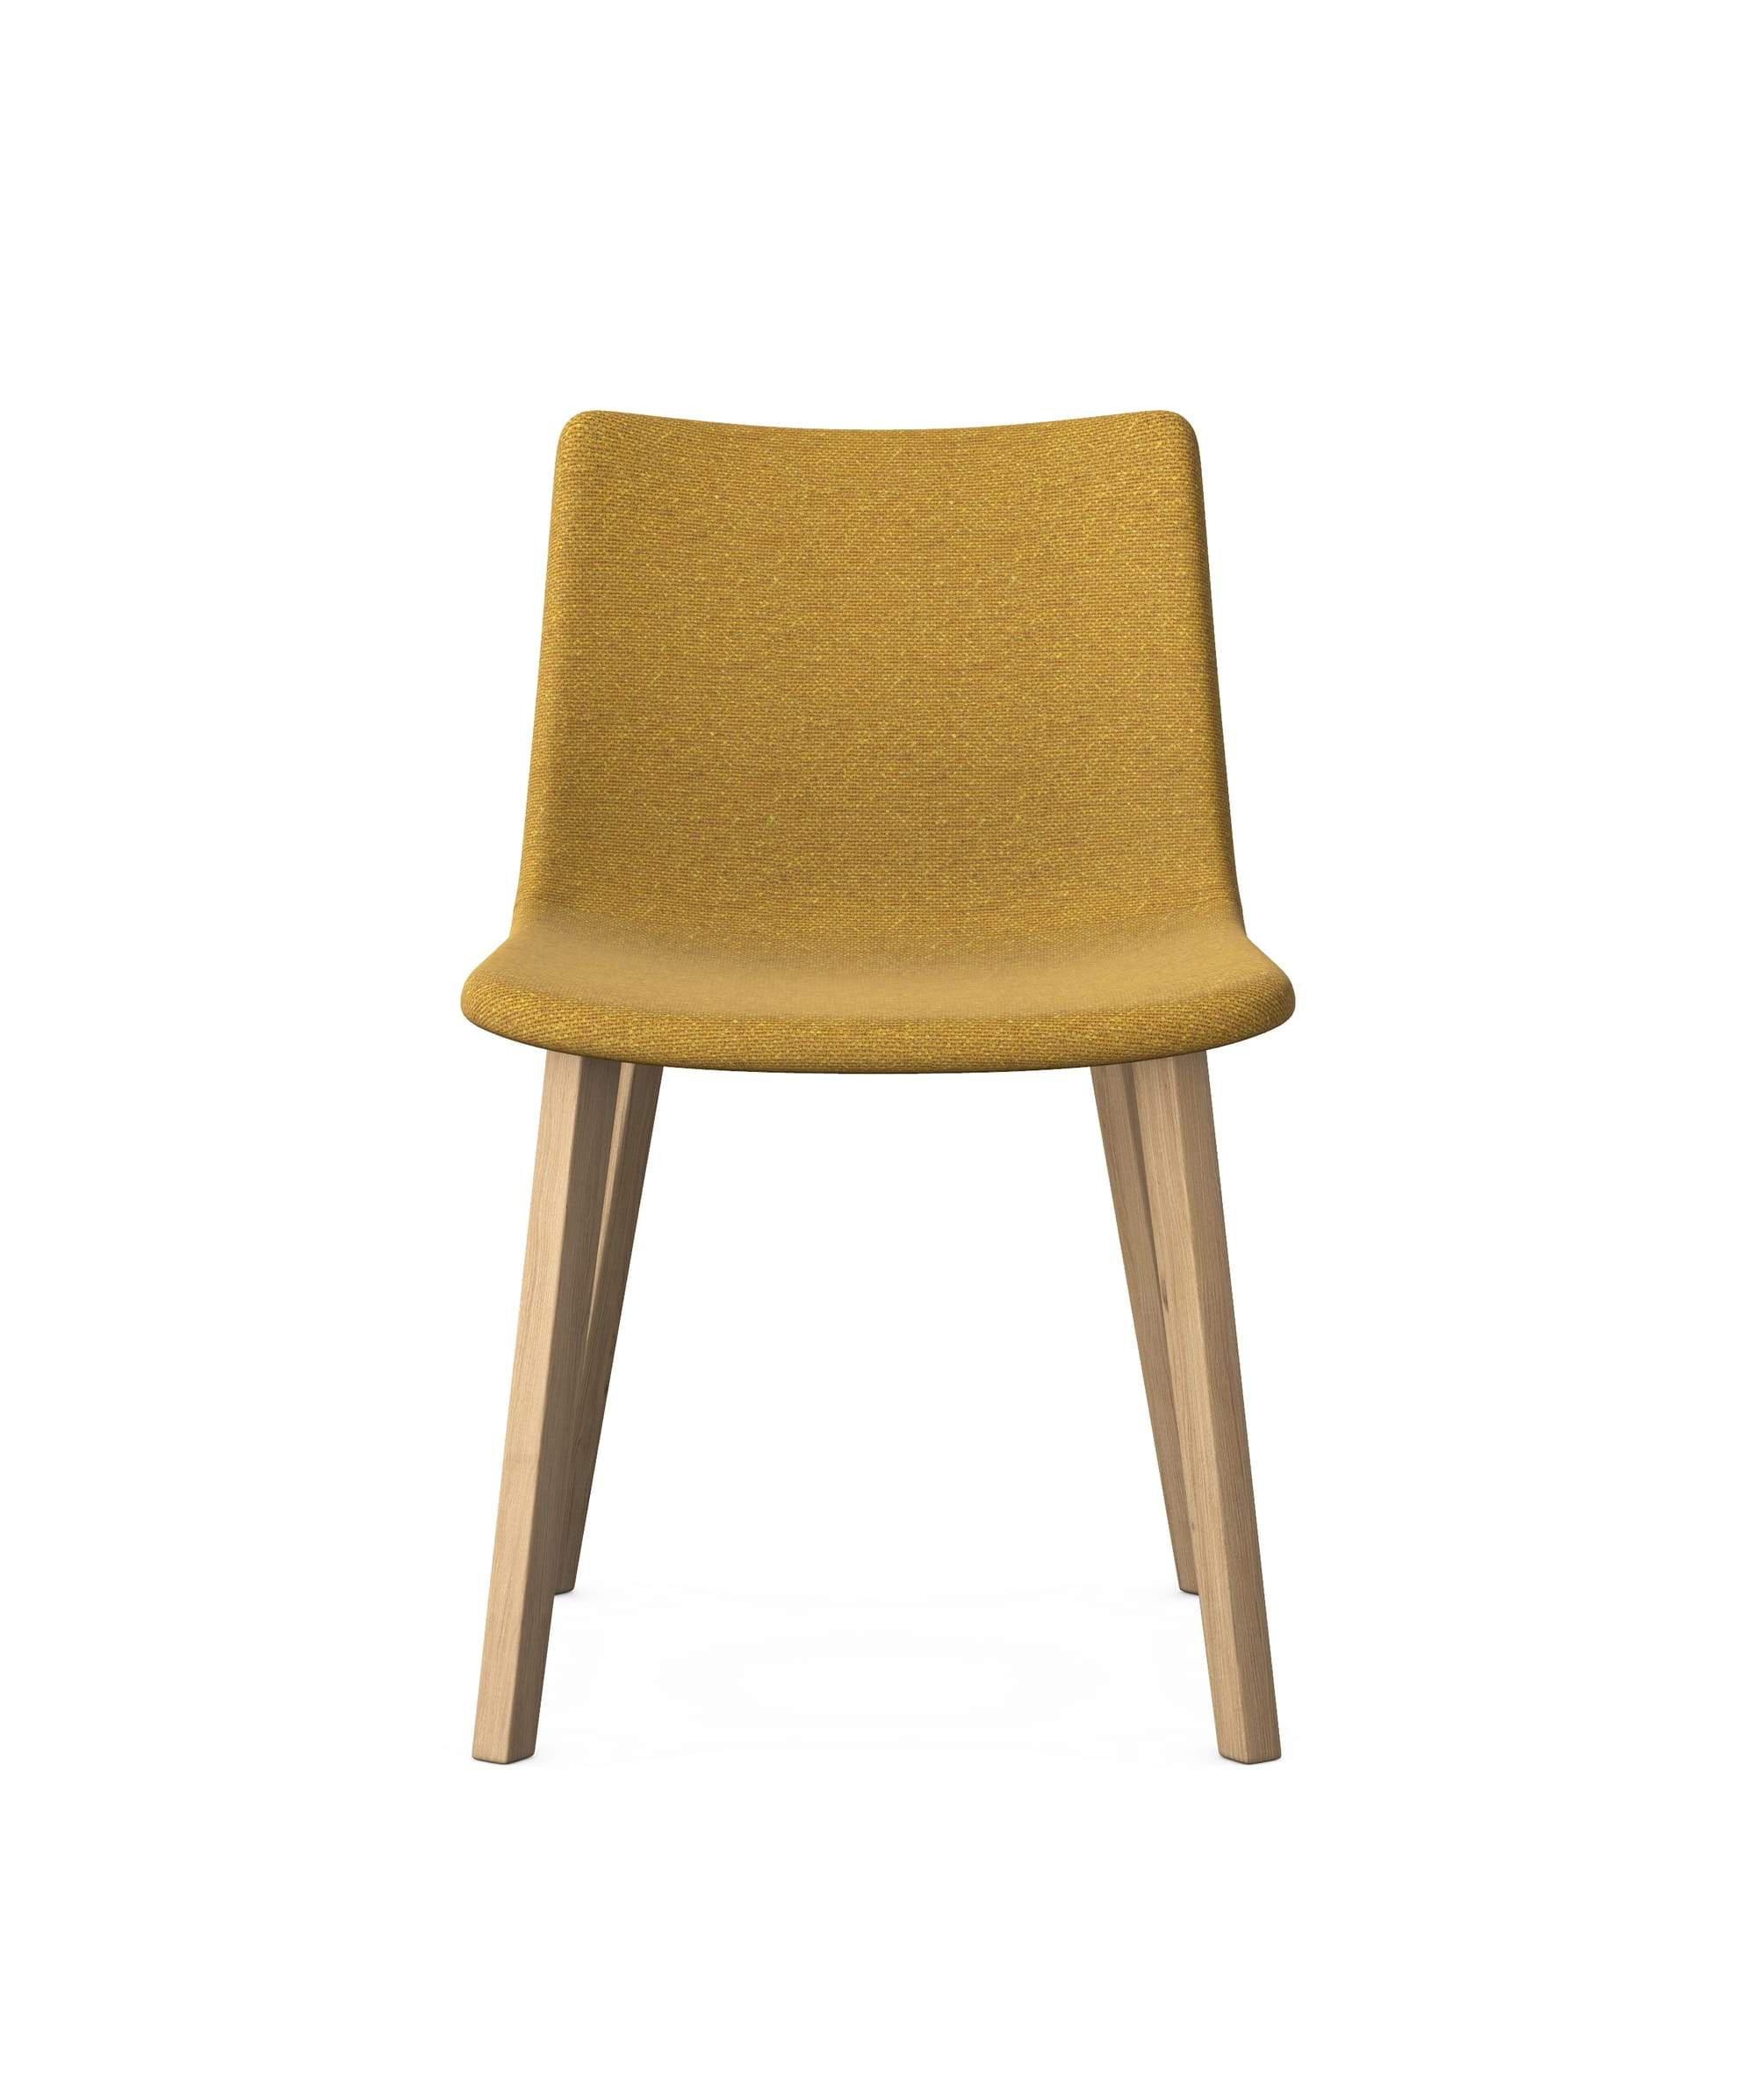 PRIME - Large Upholstered Chair, 4 Wooden Legs